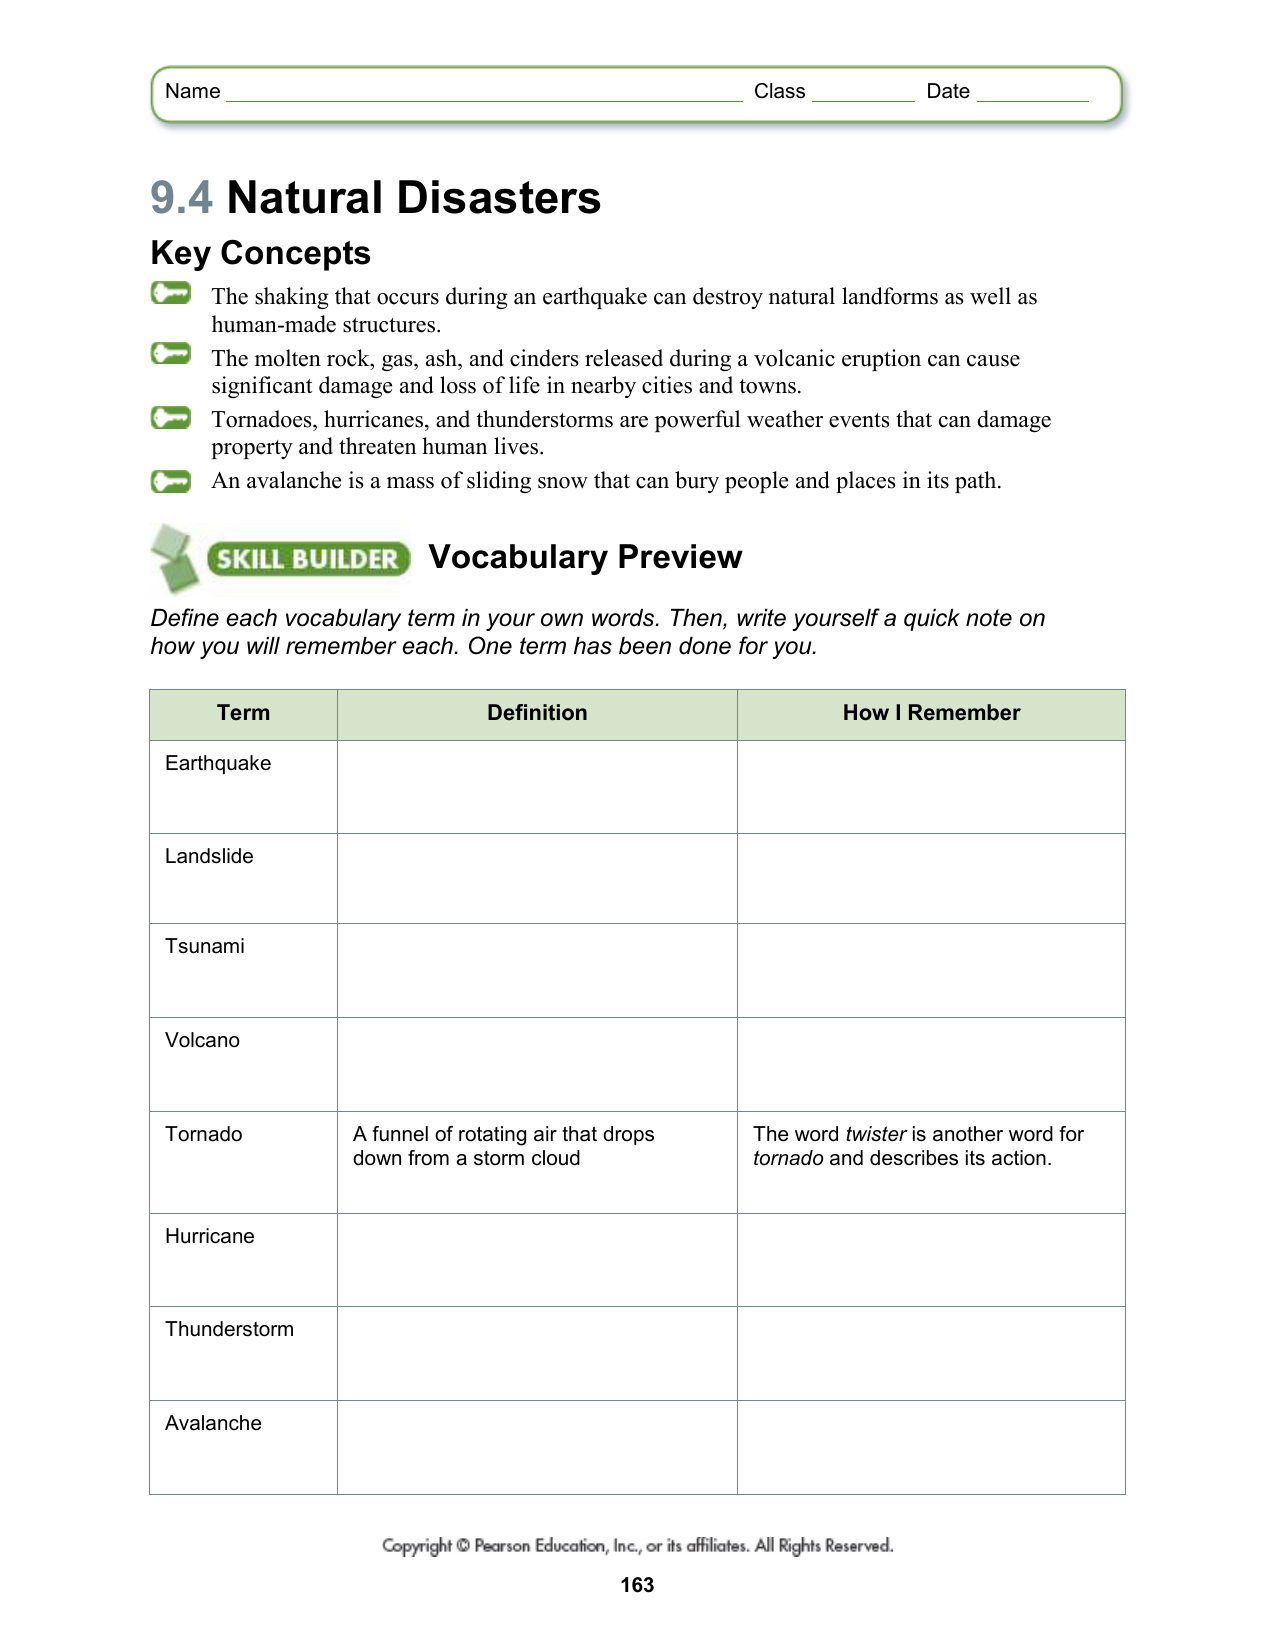 94-natural-disasters-worksheet-answers-promotiontablecovers